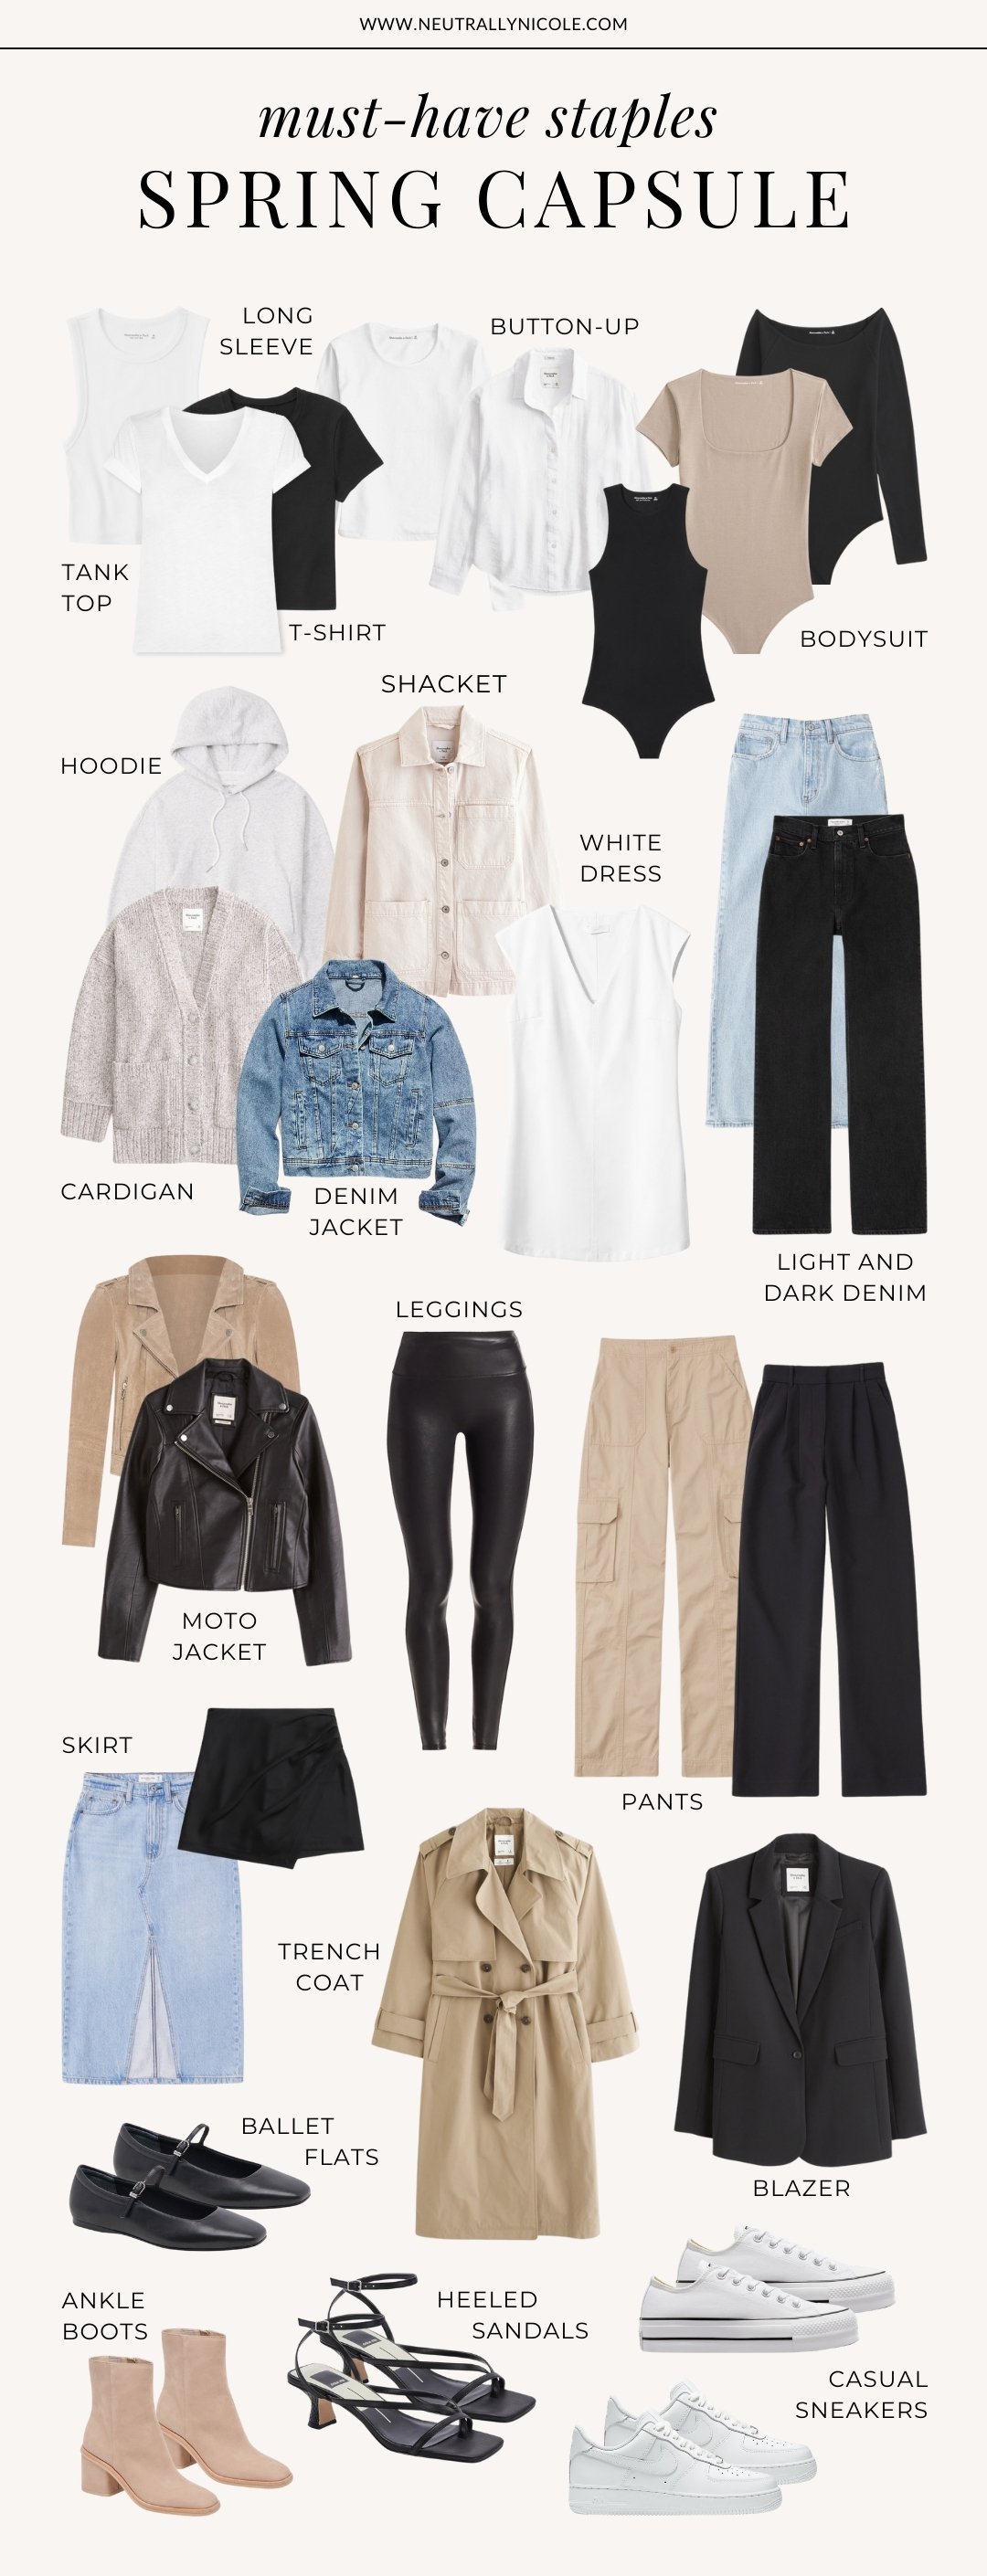 Key Spring Capsule Wardrobe Staples You Need + Easy Outfit Ideas to Copy —  Neutrally Nicole